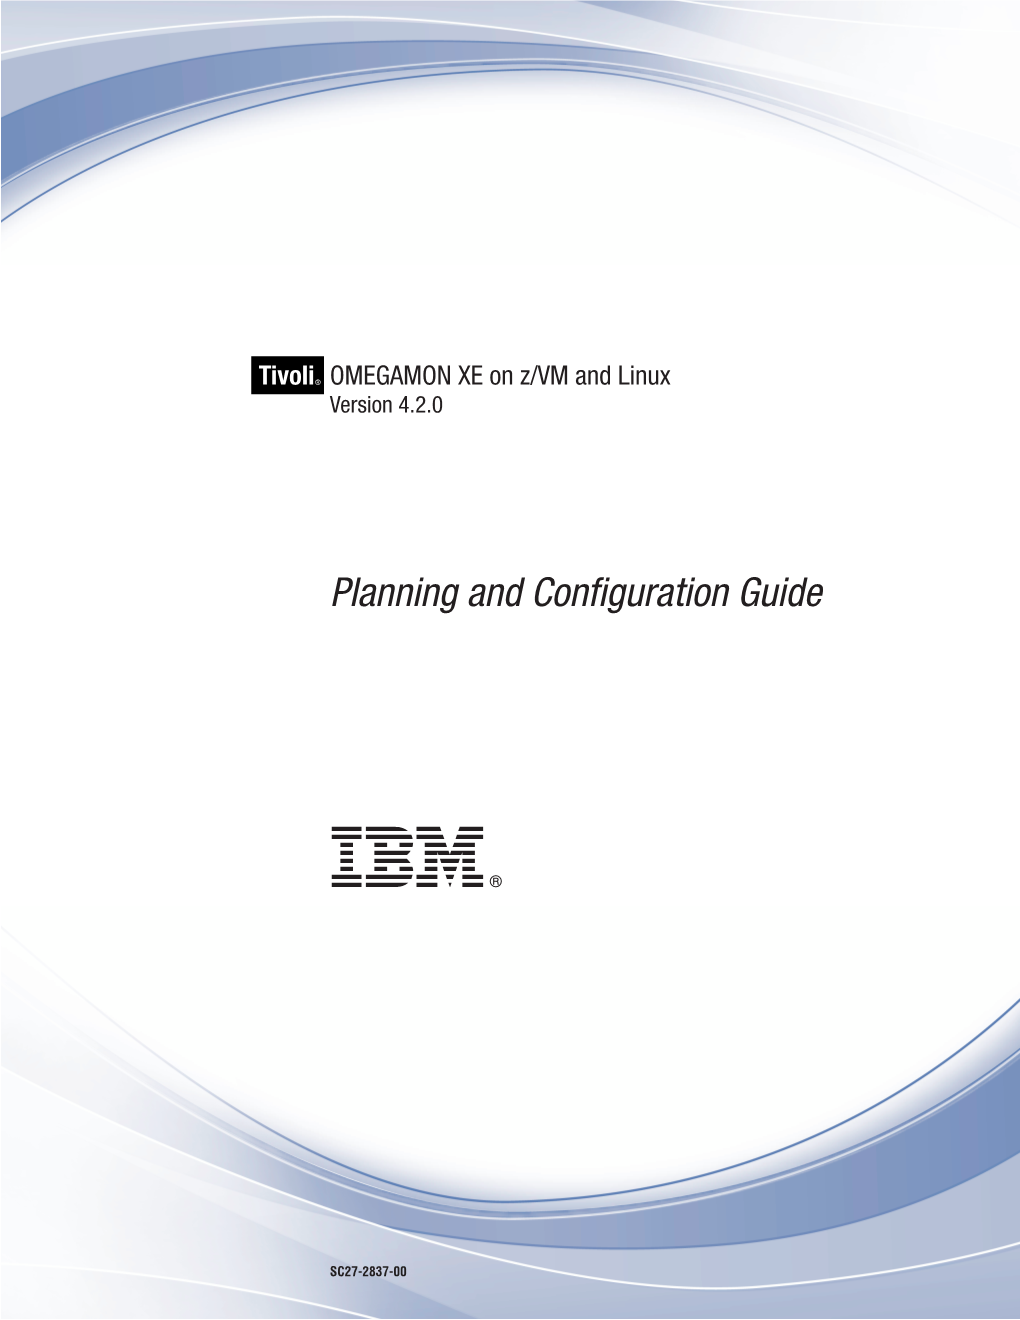 IBM Tivoli OMEGAMON XE on Z/VM and Linux: Planning and Configuration Guide Part 4